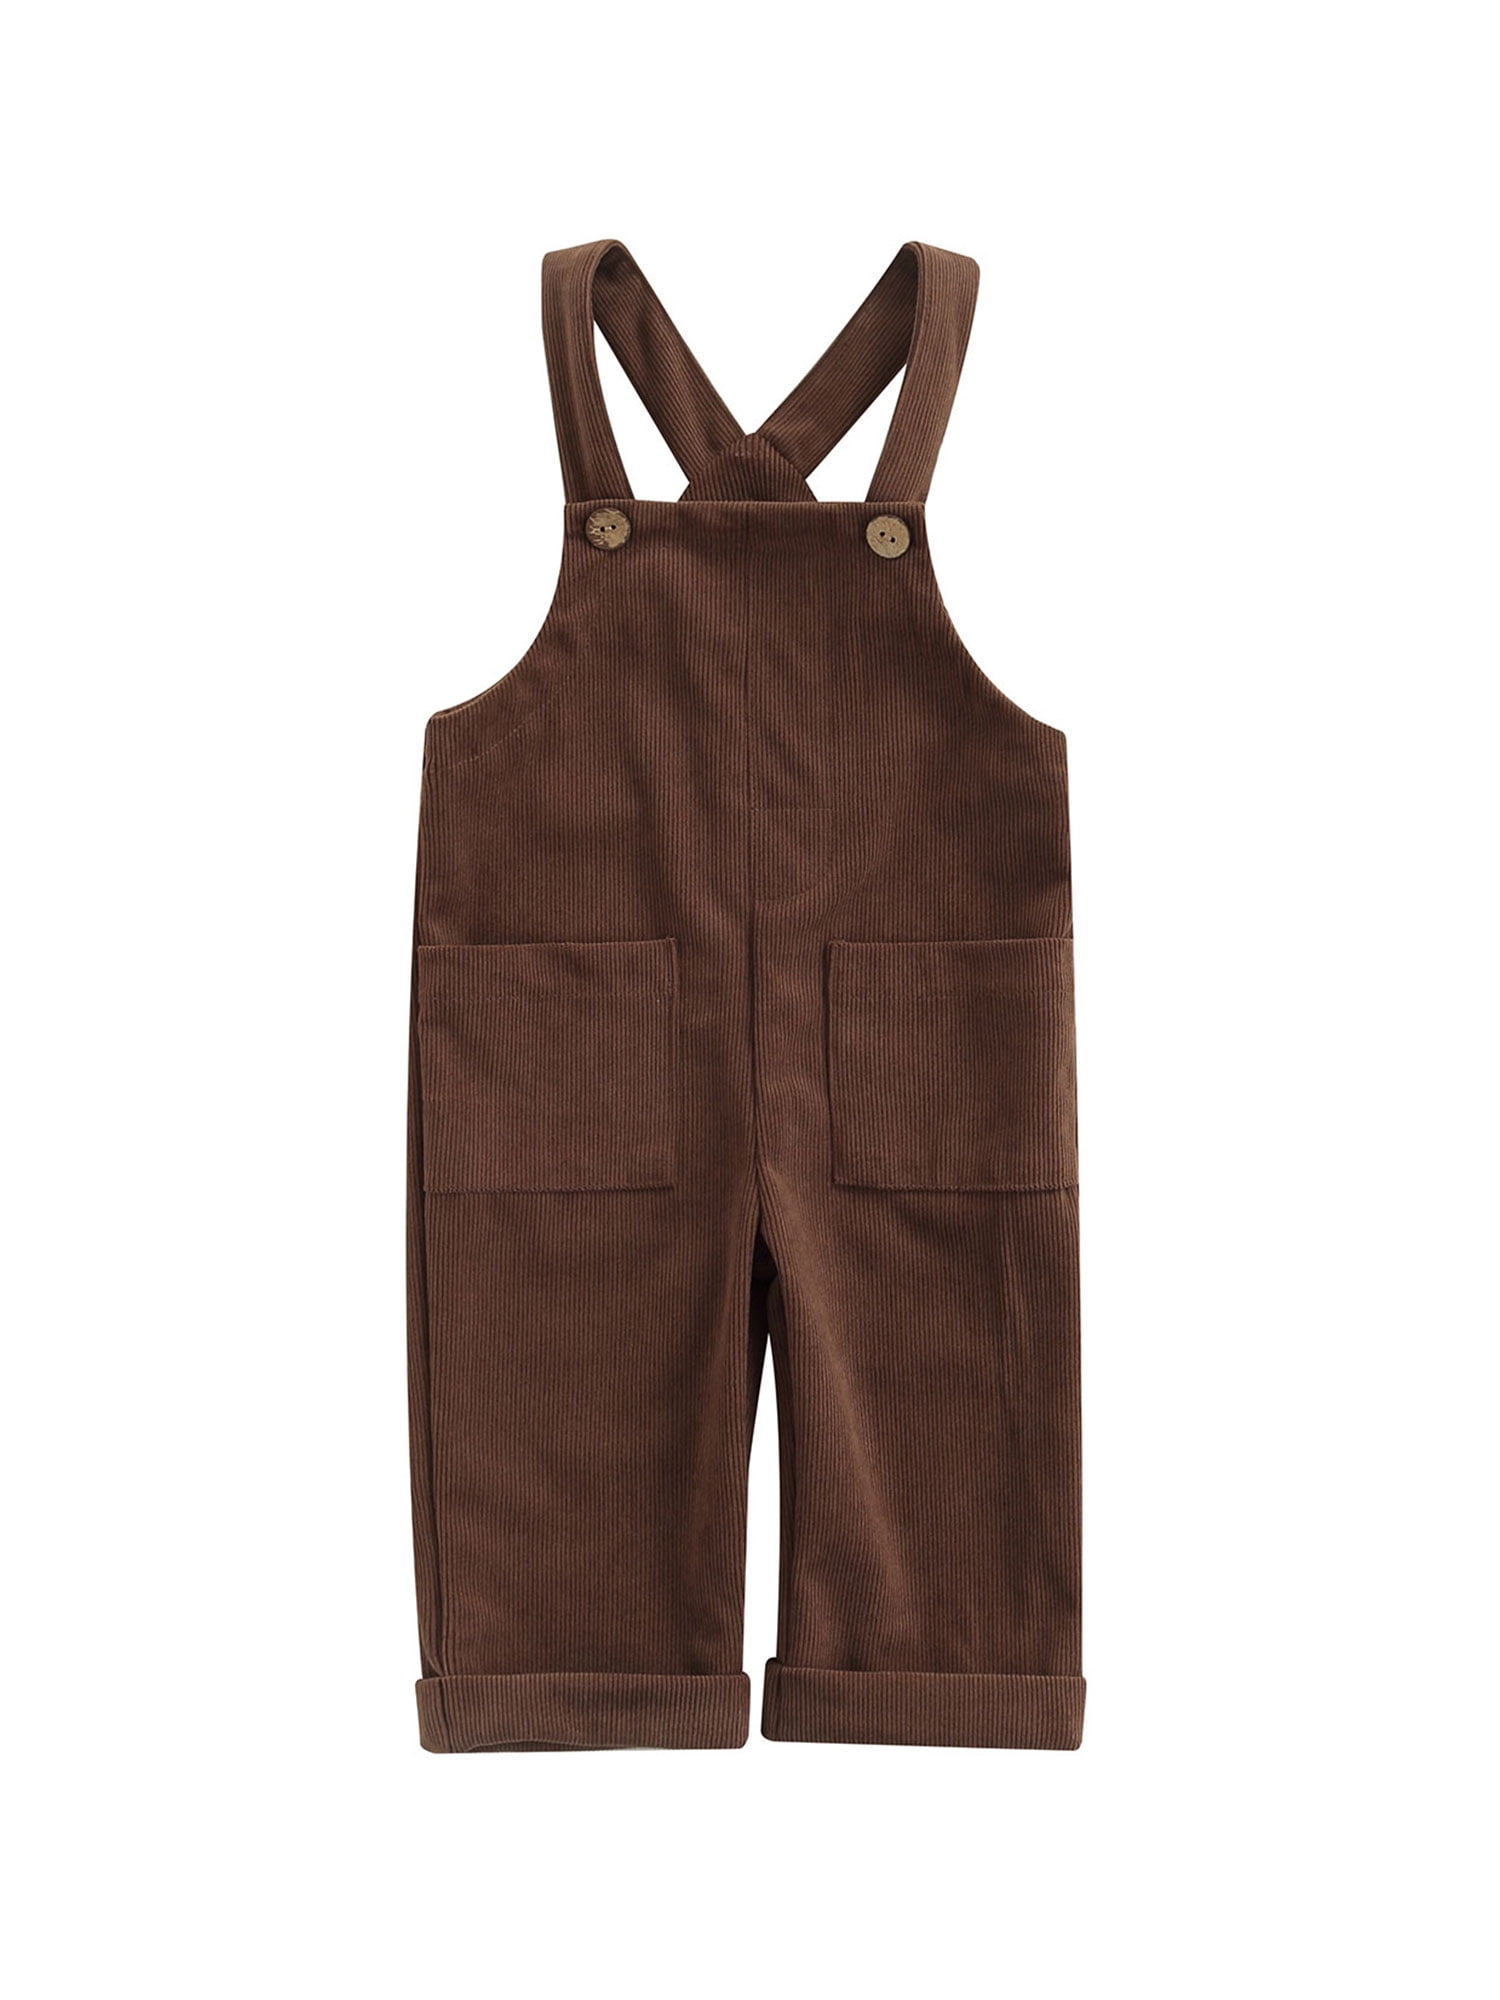 Yoonly Toddler Boy Girl Soft Corduroy Suspender Pants Kids Overalls Loose Retro Bib Overall Corduroy Jumpsuit with Pockets 